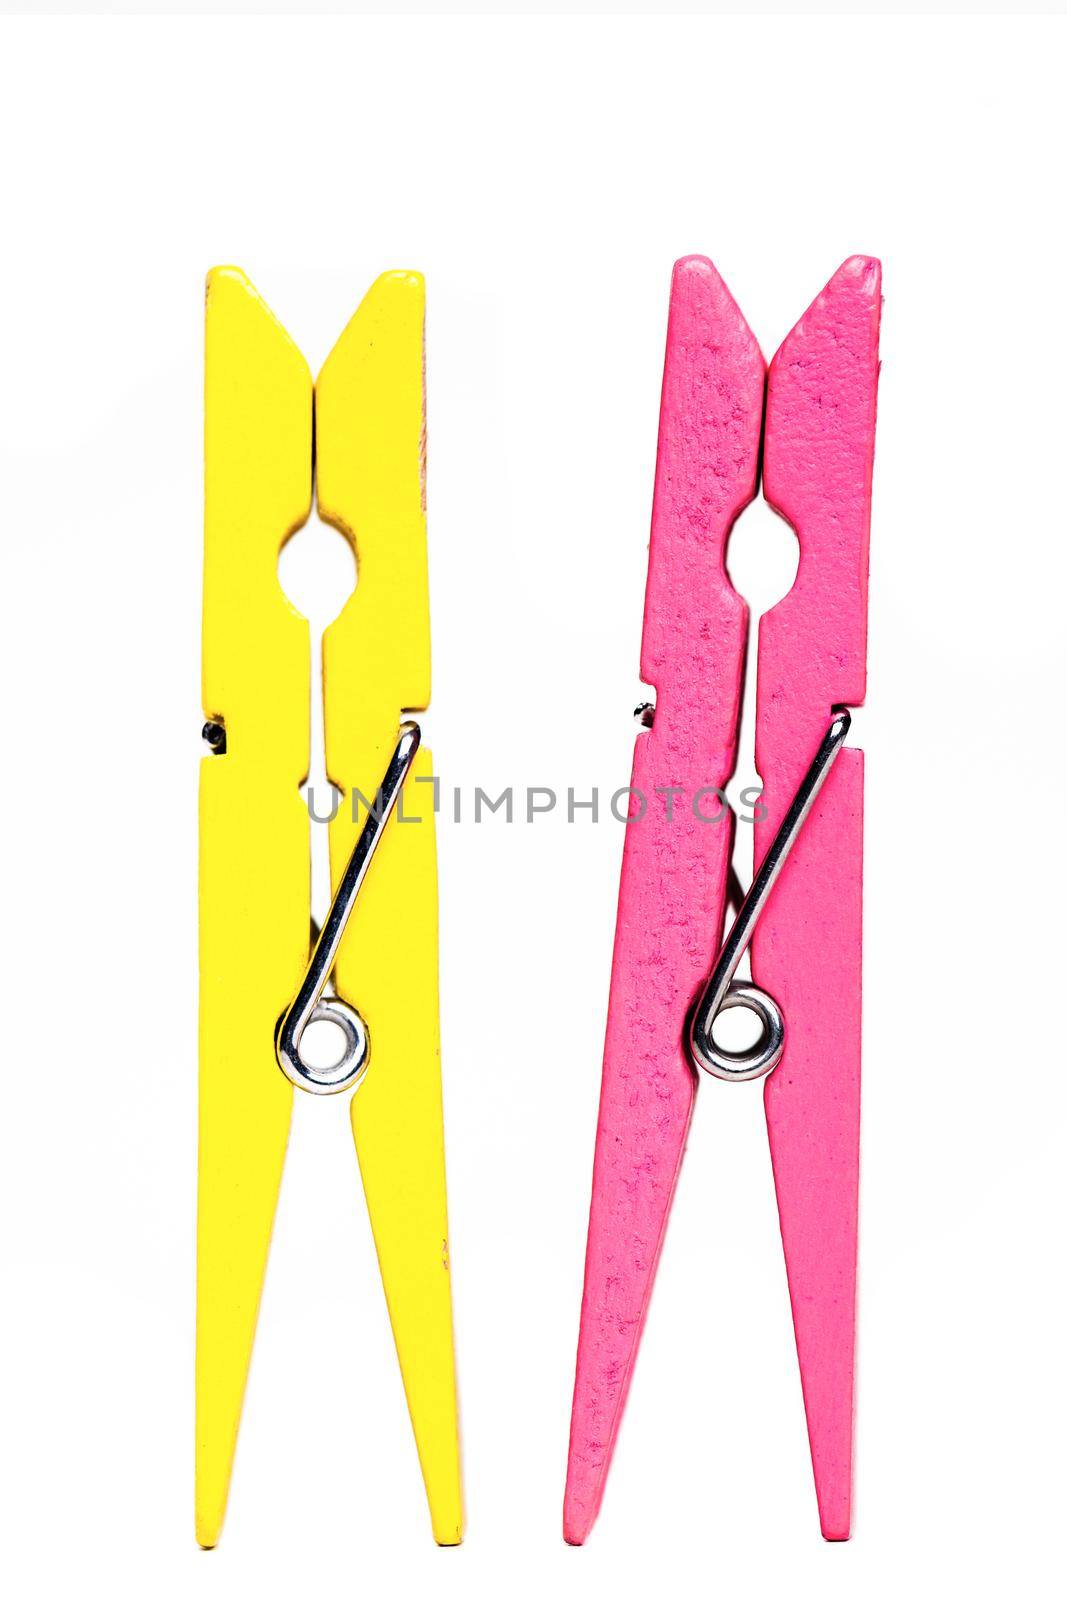 yellow and pink clothes pegs by kokimk